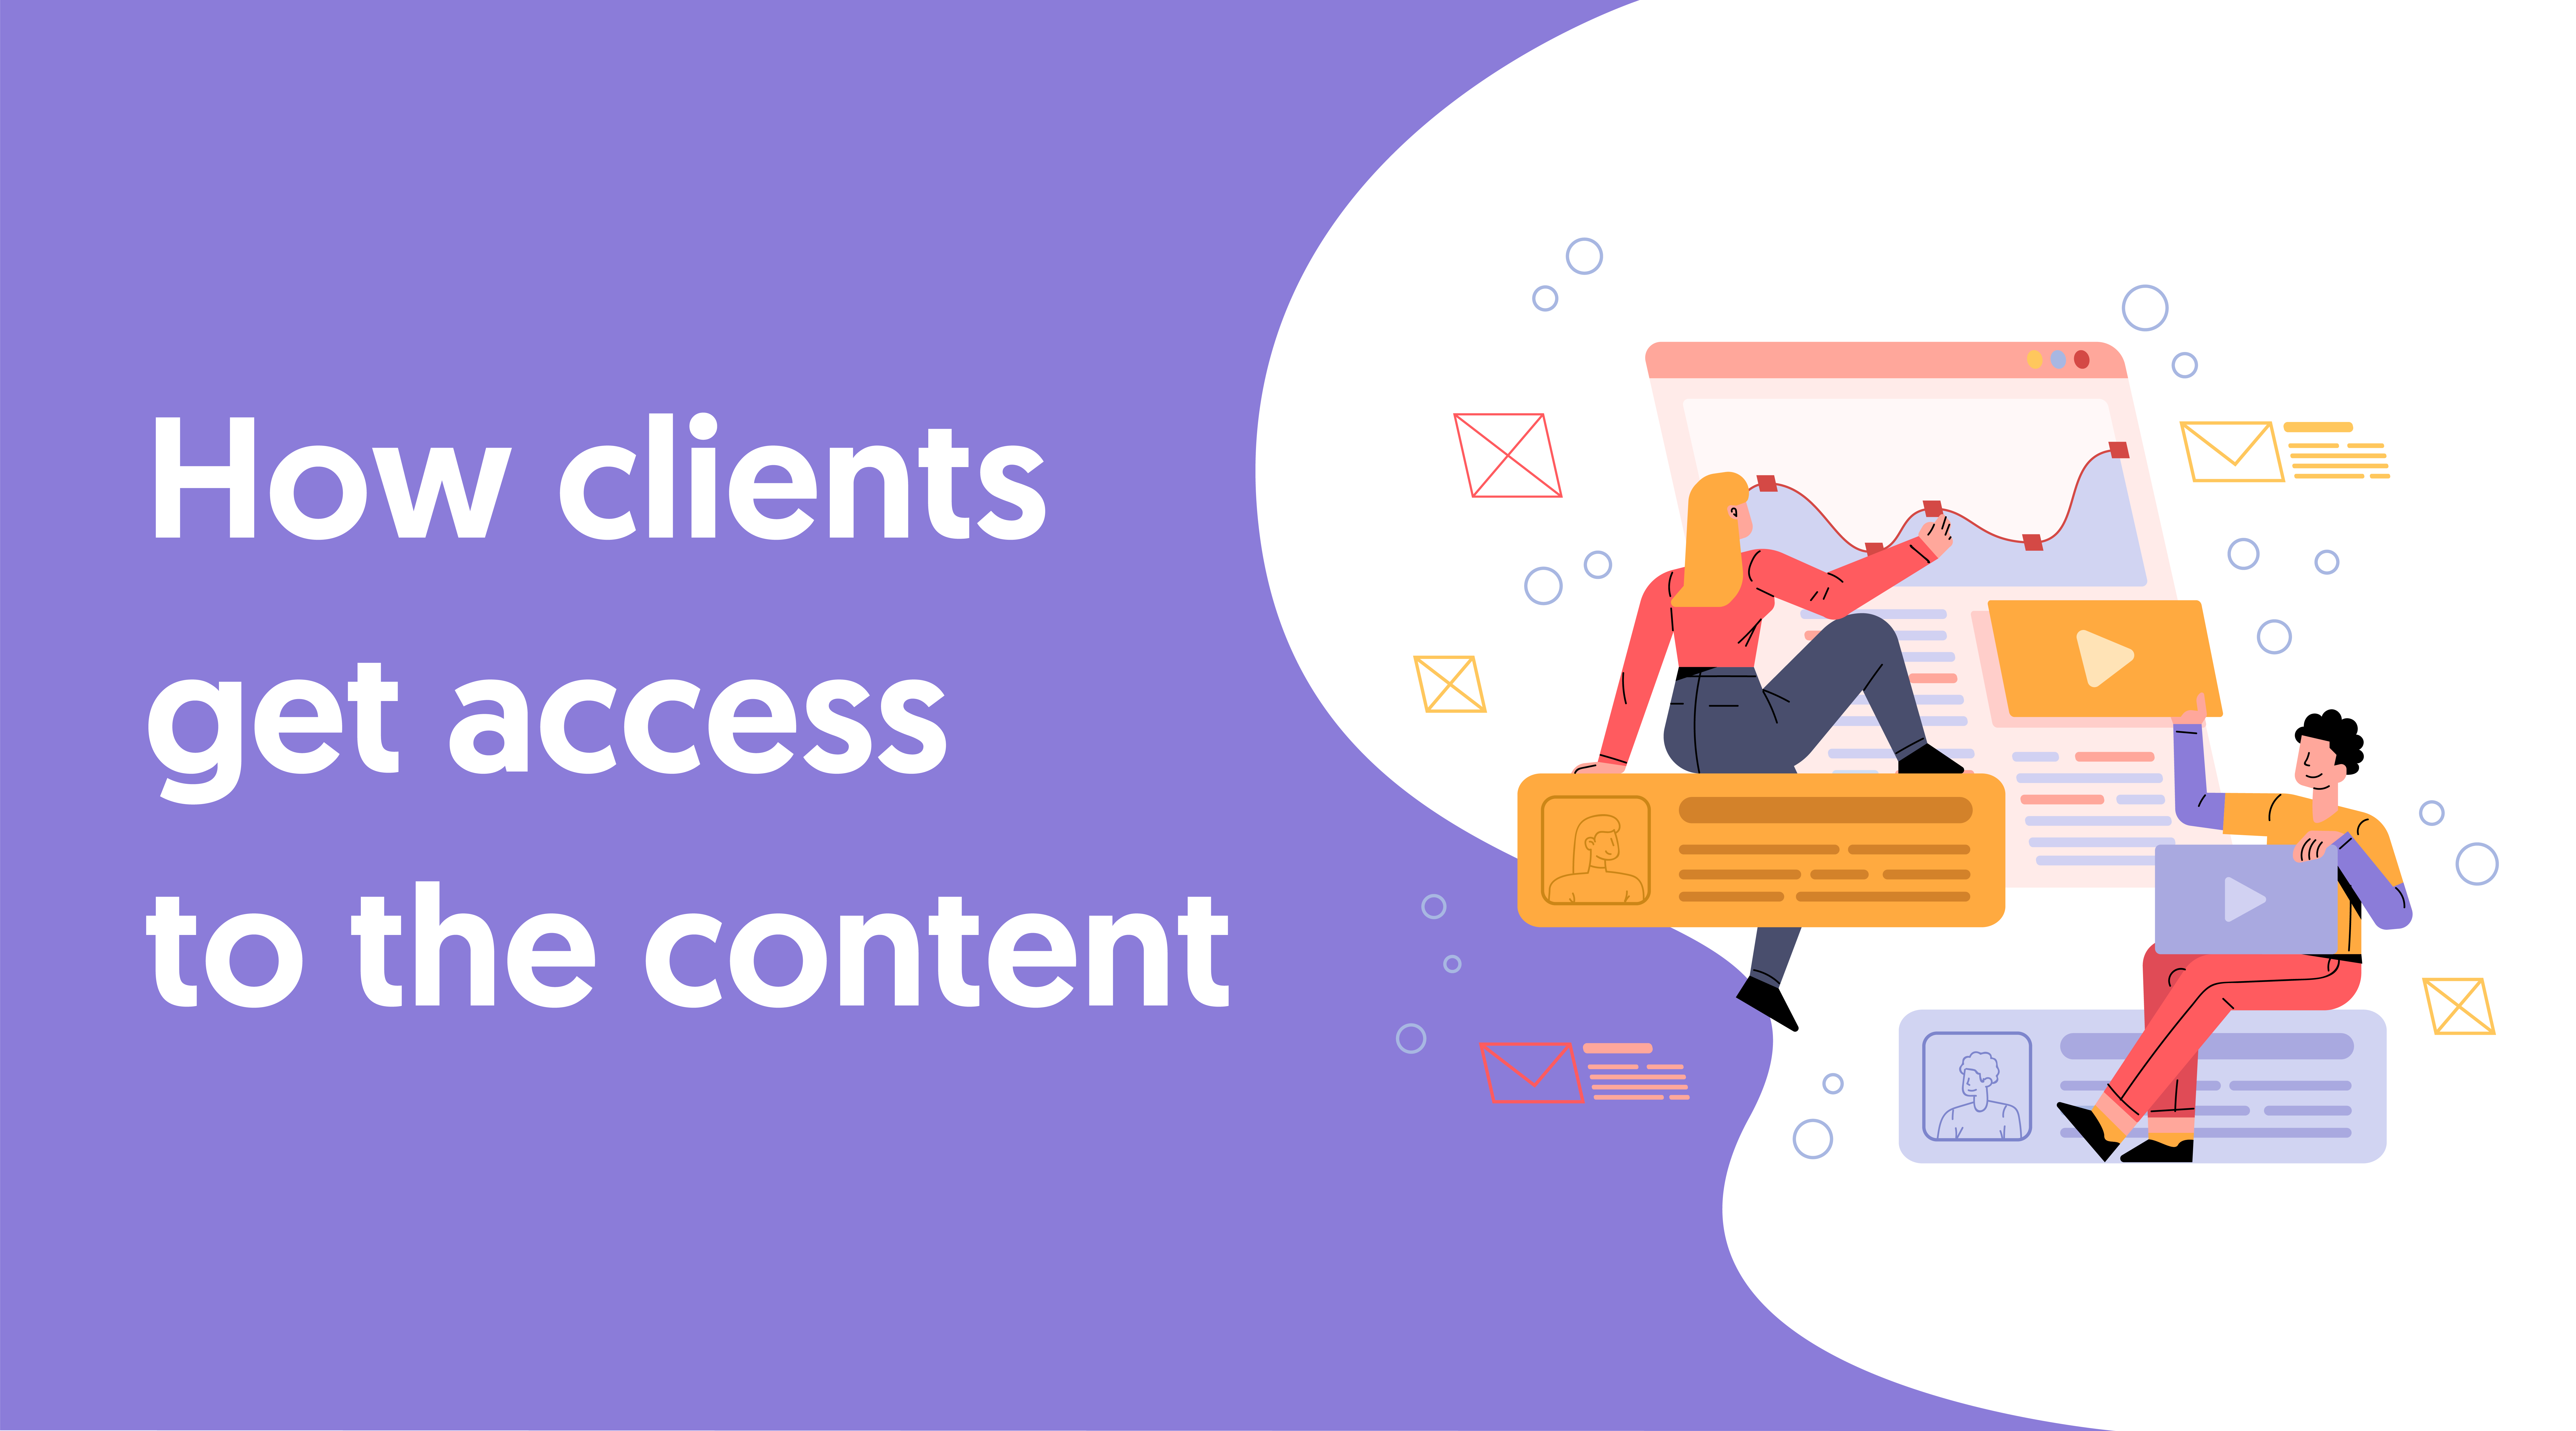 How clients get access to the content